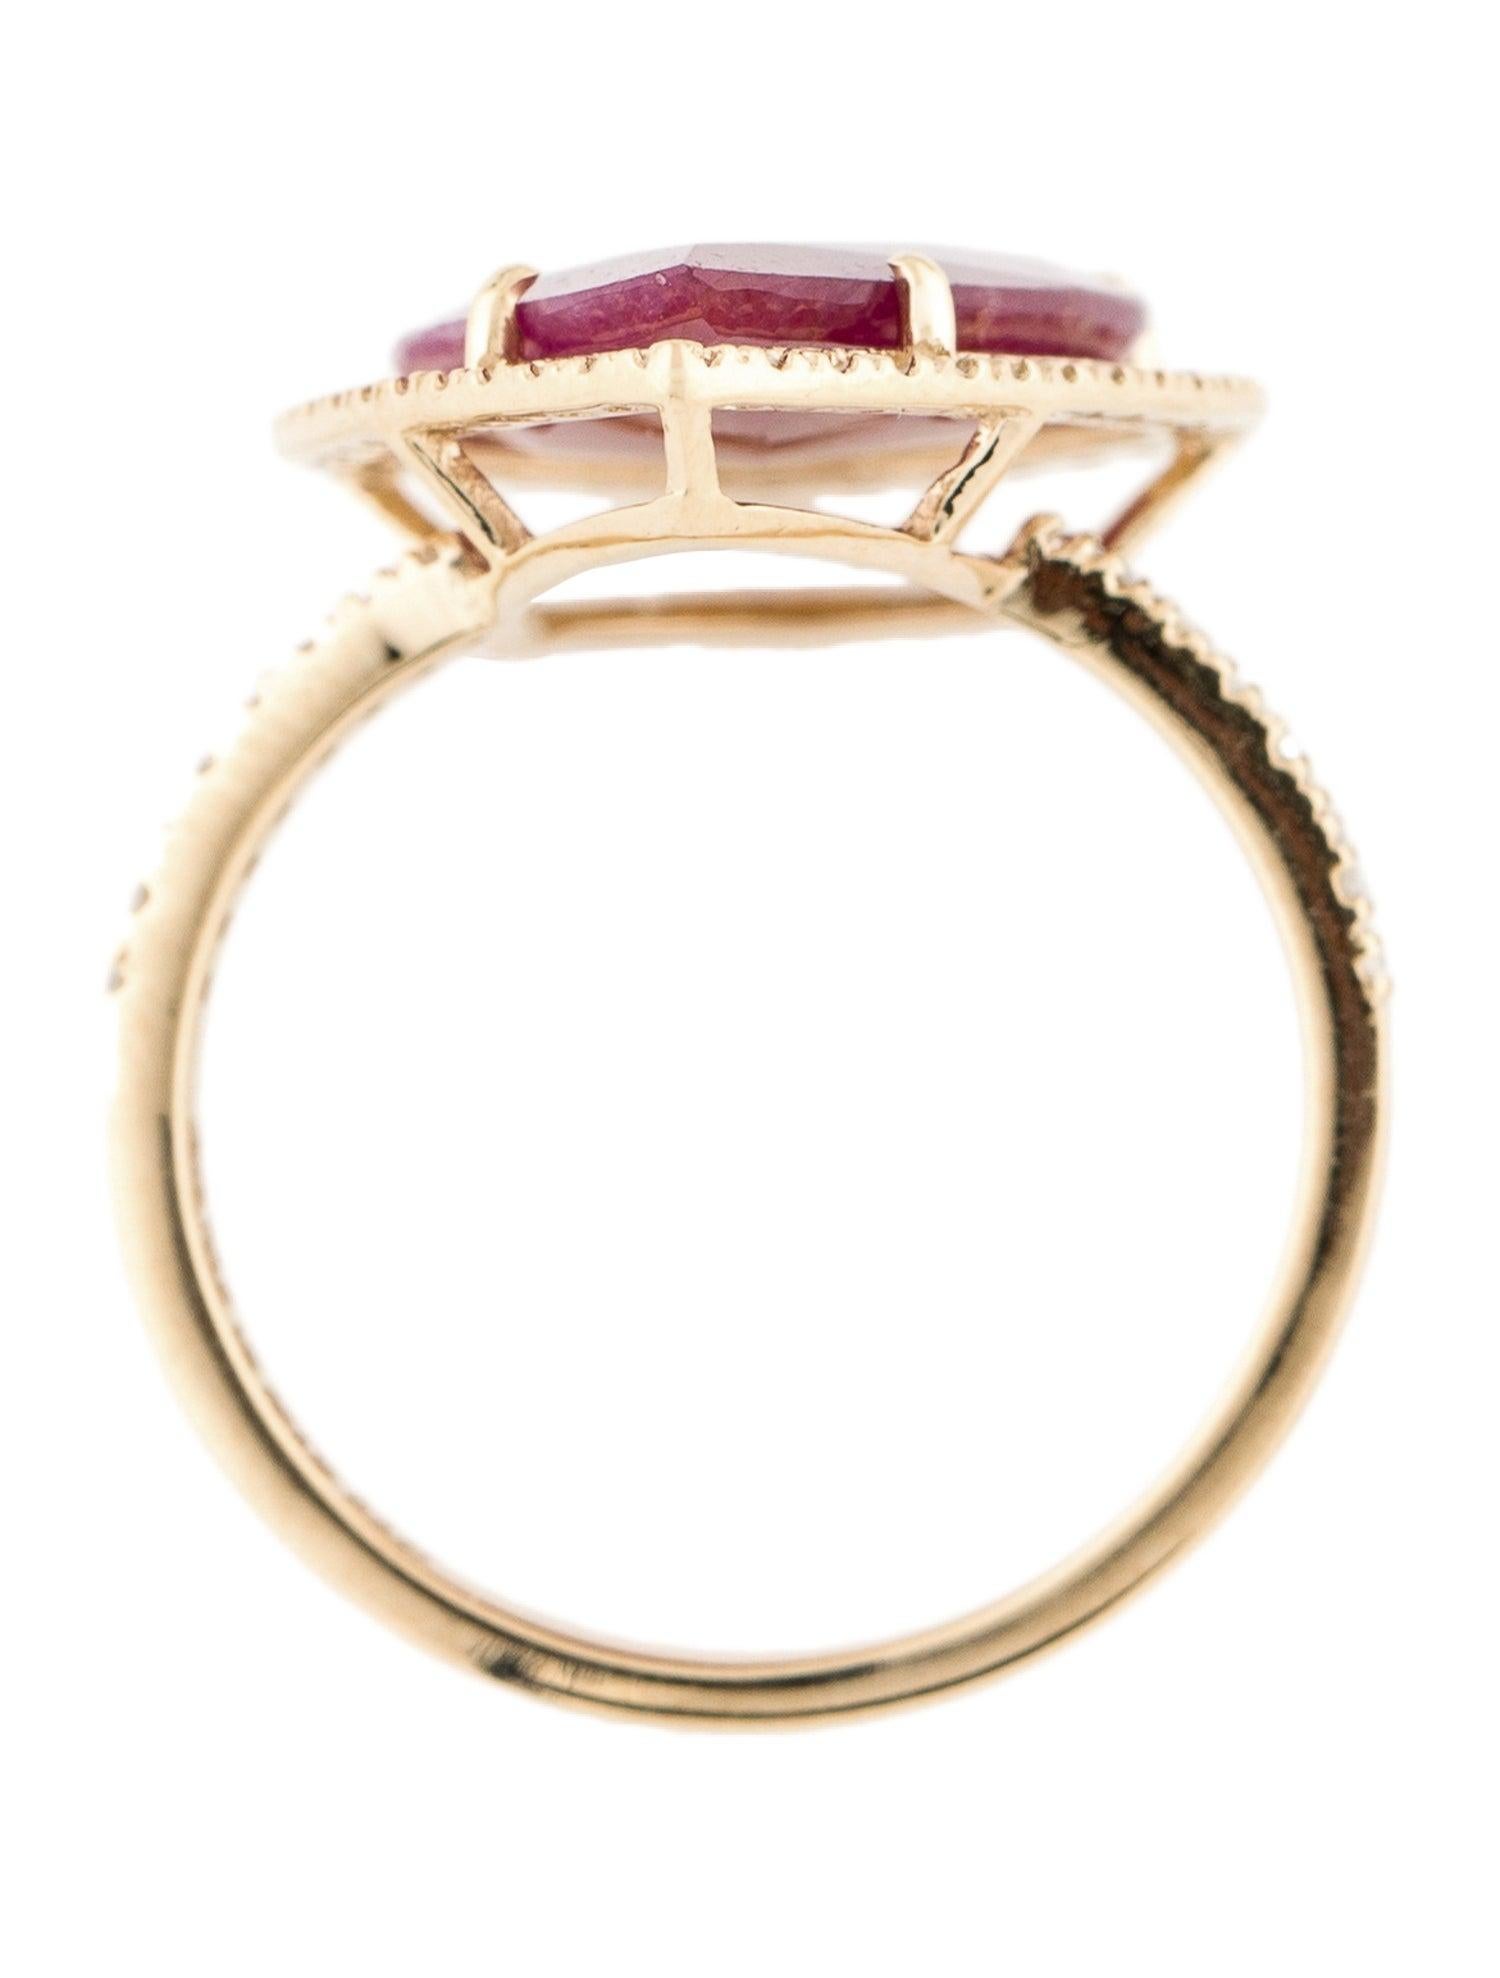 Dazzling 14K Gold 6.16ct Ruby & Diamond Cocktail Ring - Size 7.5 - Fine Jewelry In New Condition For Sale In Holtsville, NY